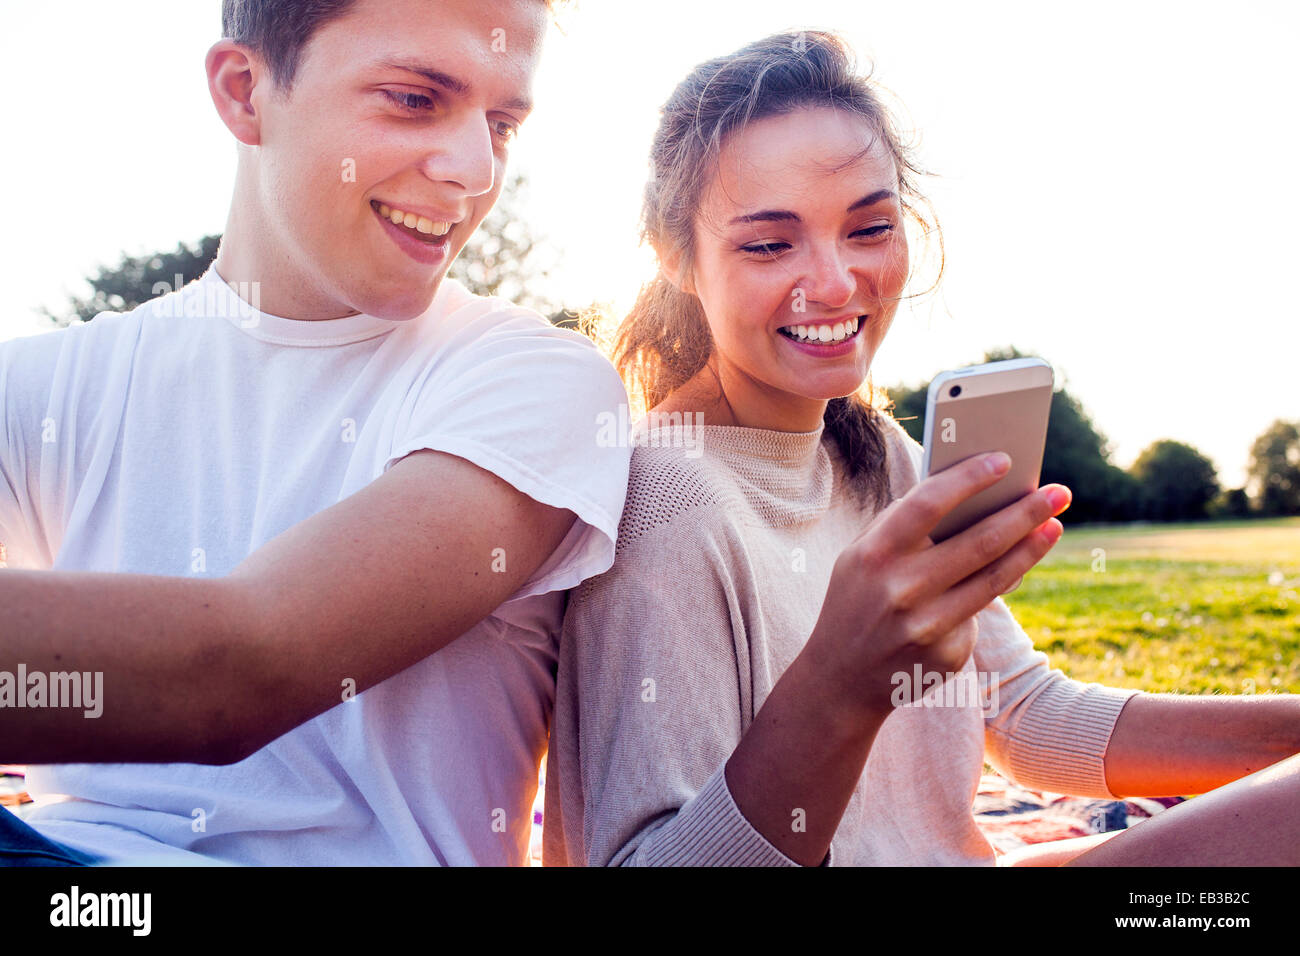 Caucasian couple using cell phone outdoors Banque D'Images